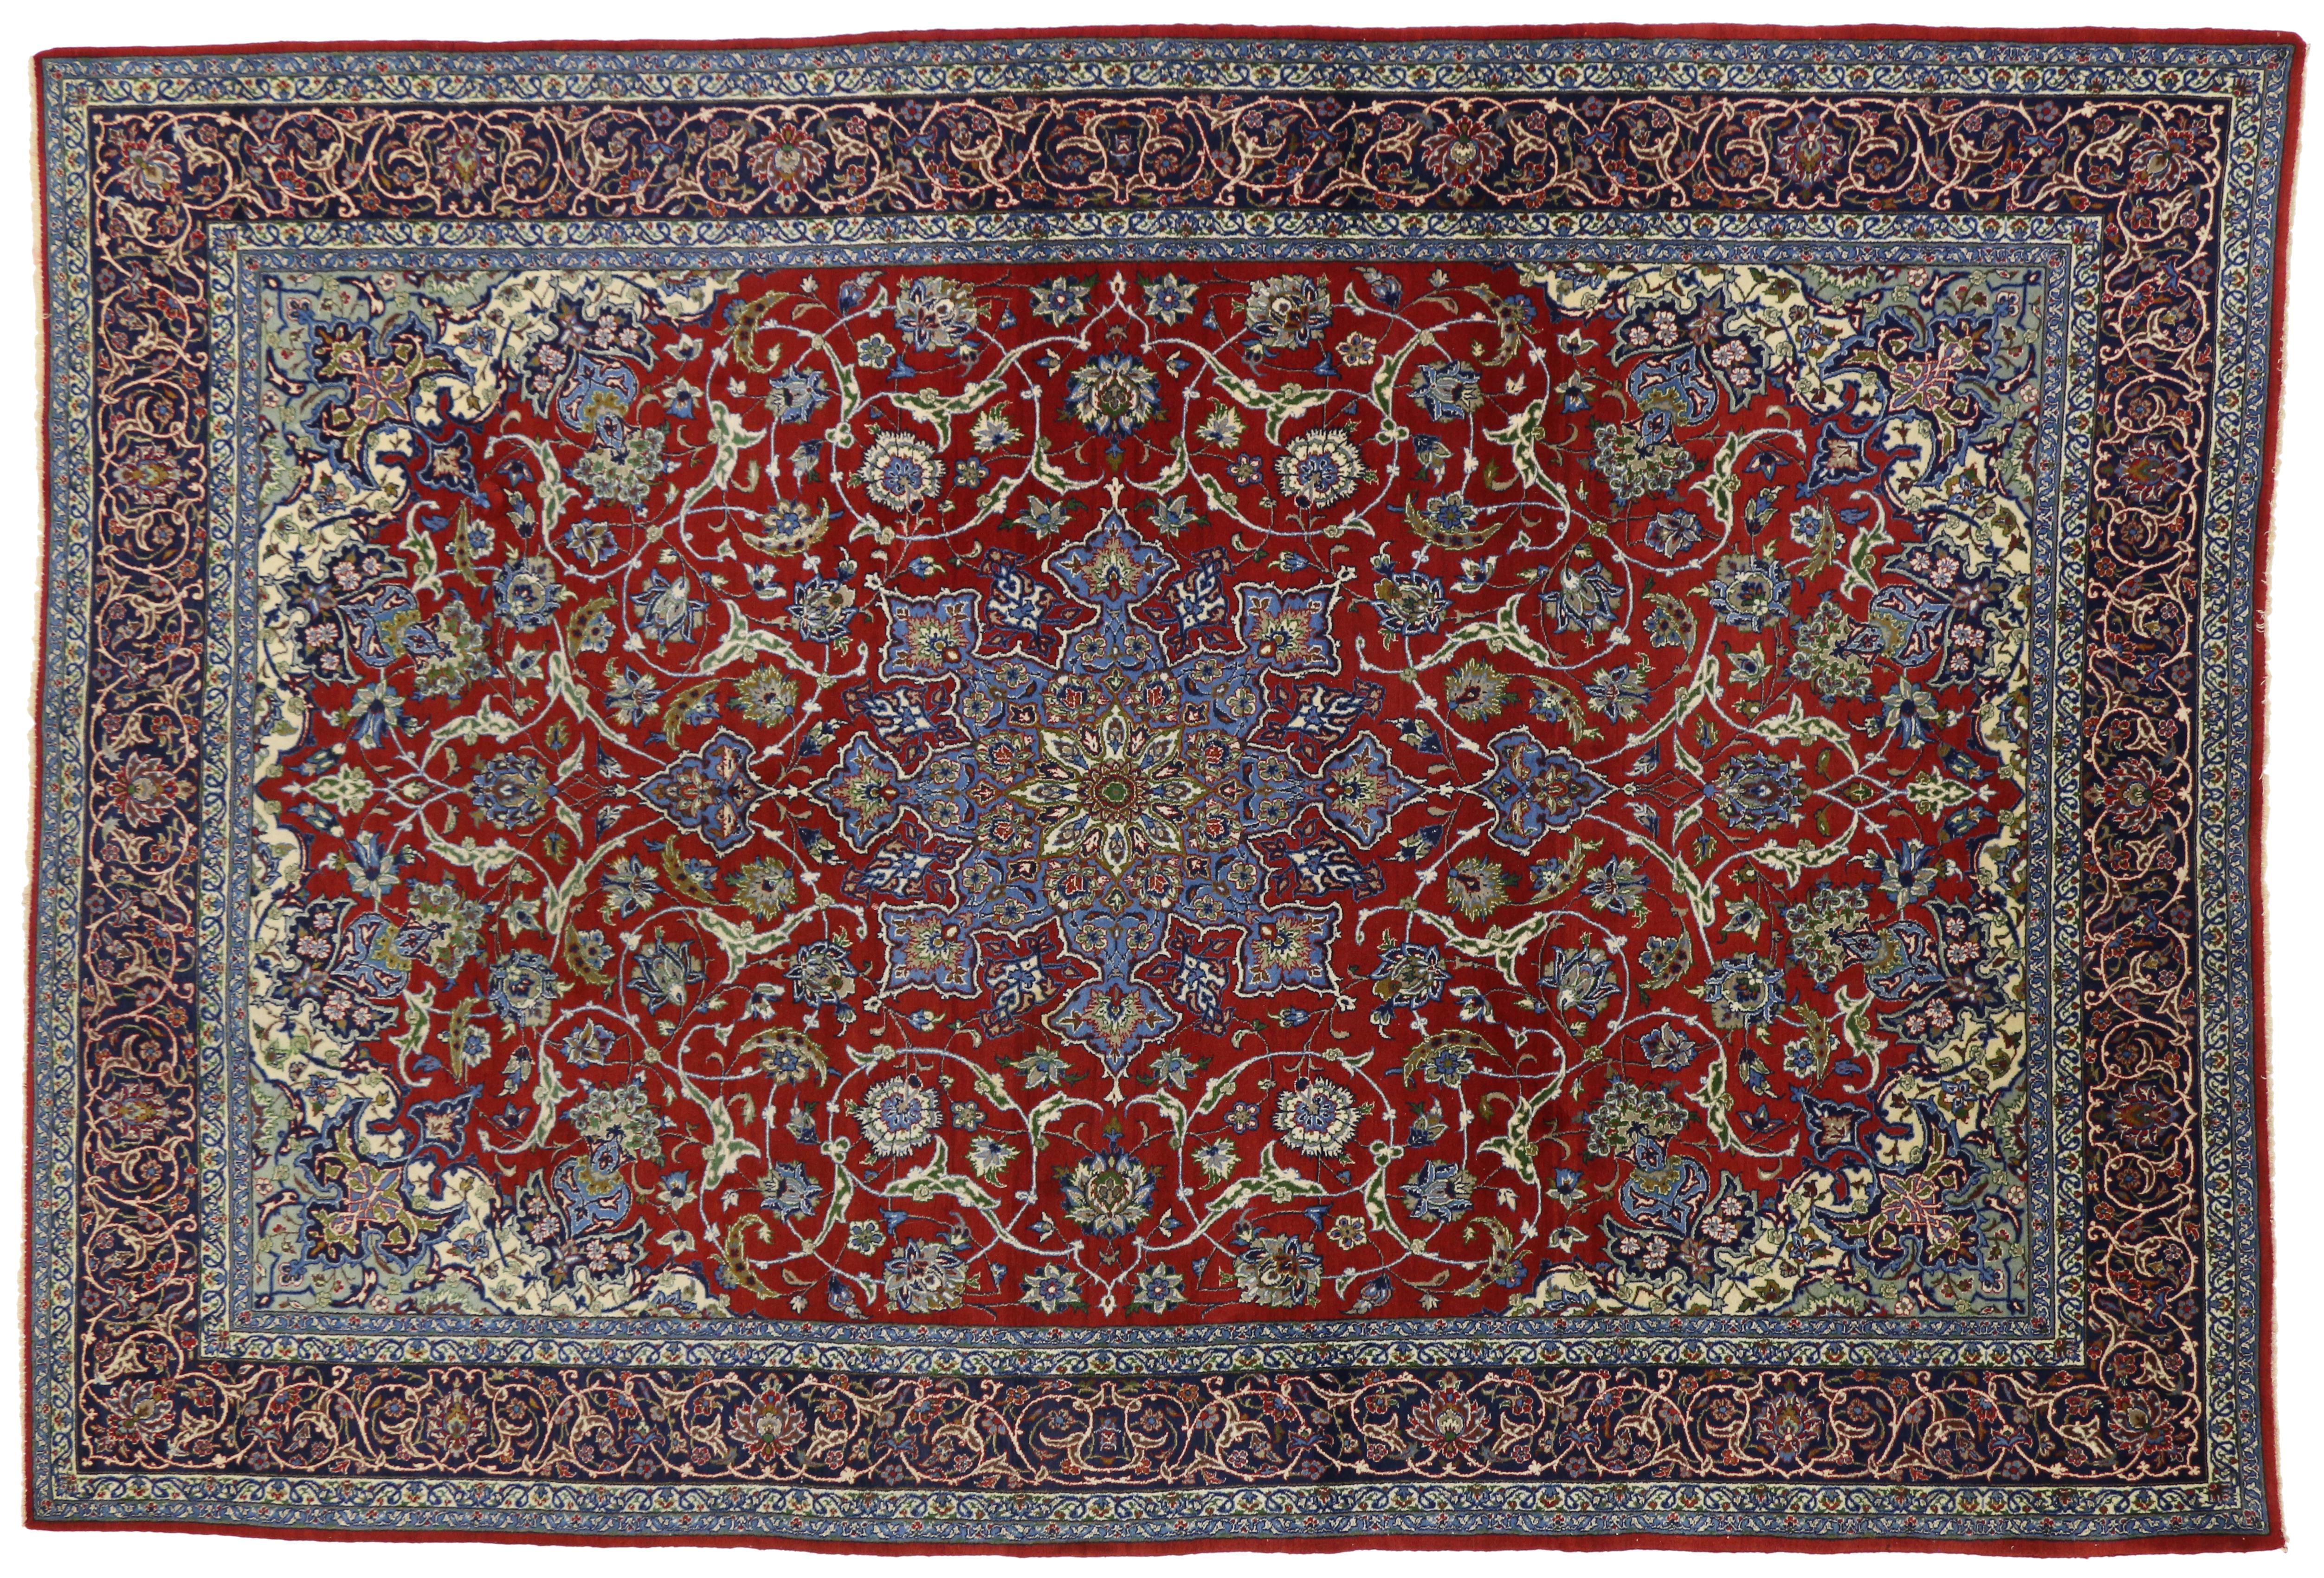 Art Nouveau Vintage Persian Isfahan Rug with Shah Abba Design and Arabesque Federal Style